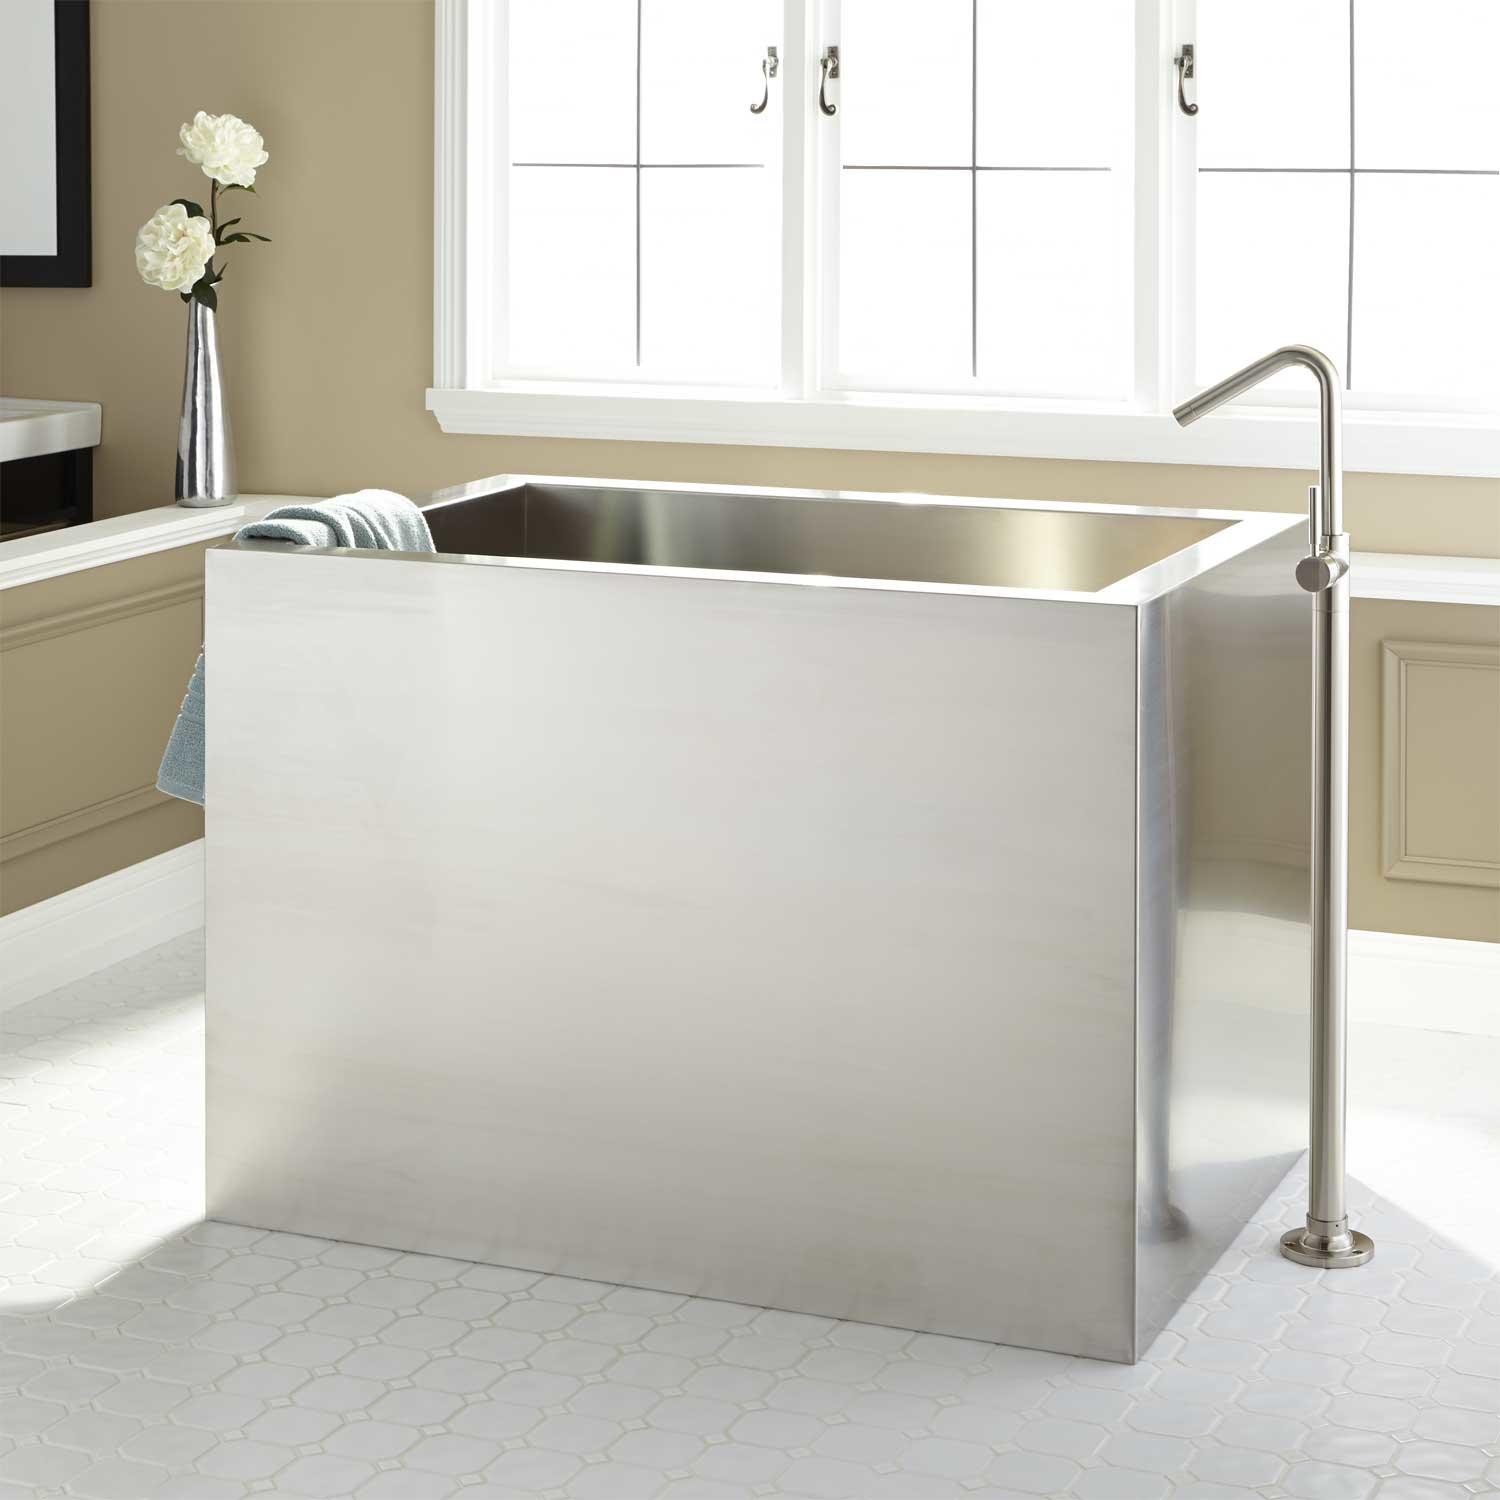 Ofuro Soaking Tubs: The Vibe Of Japan In Your Bathroom ...